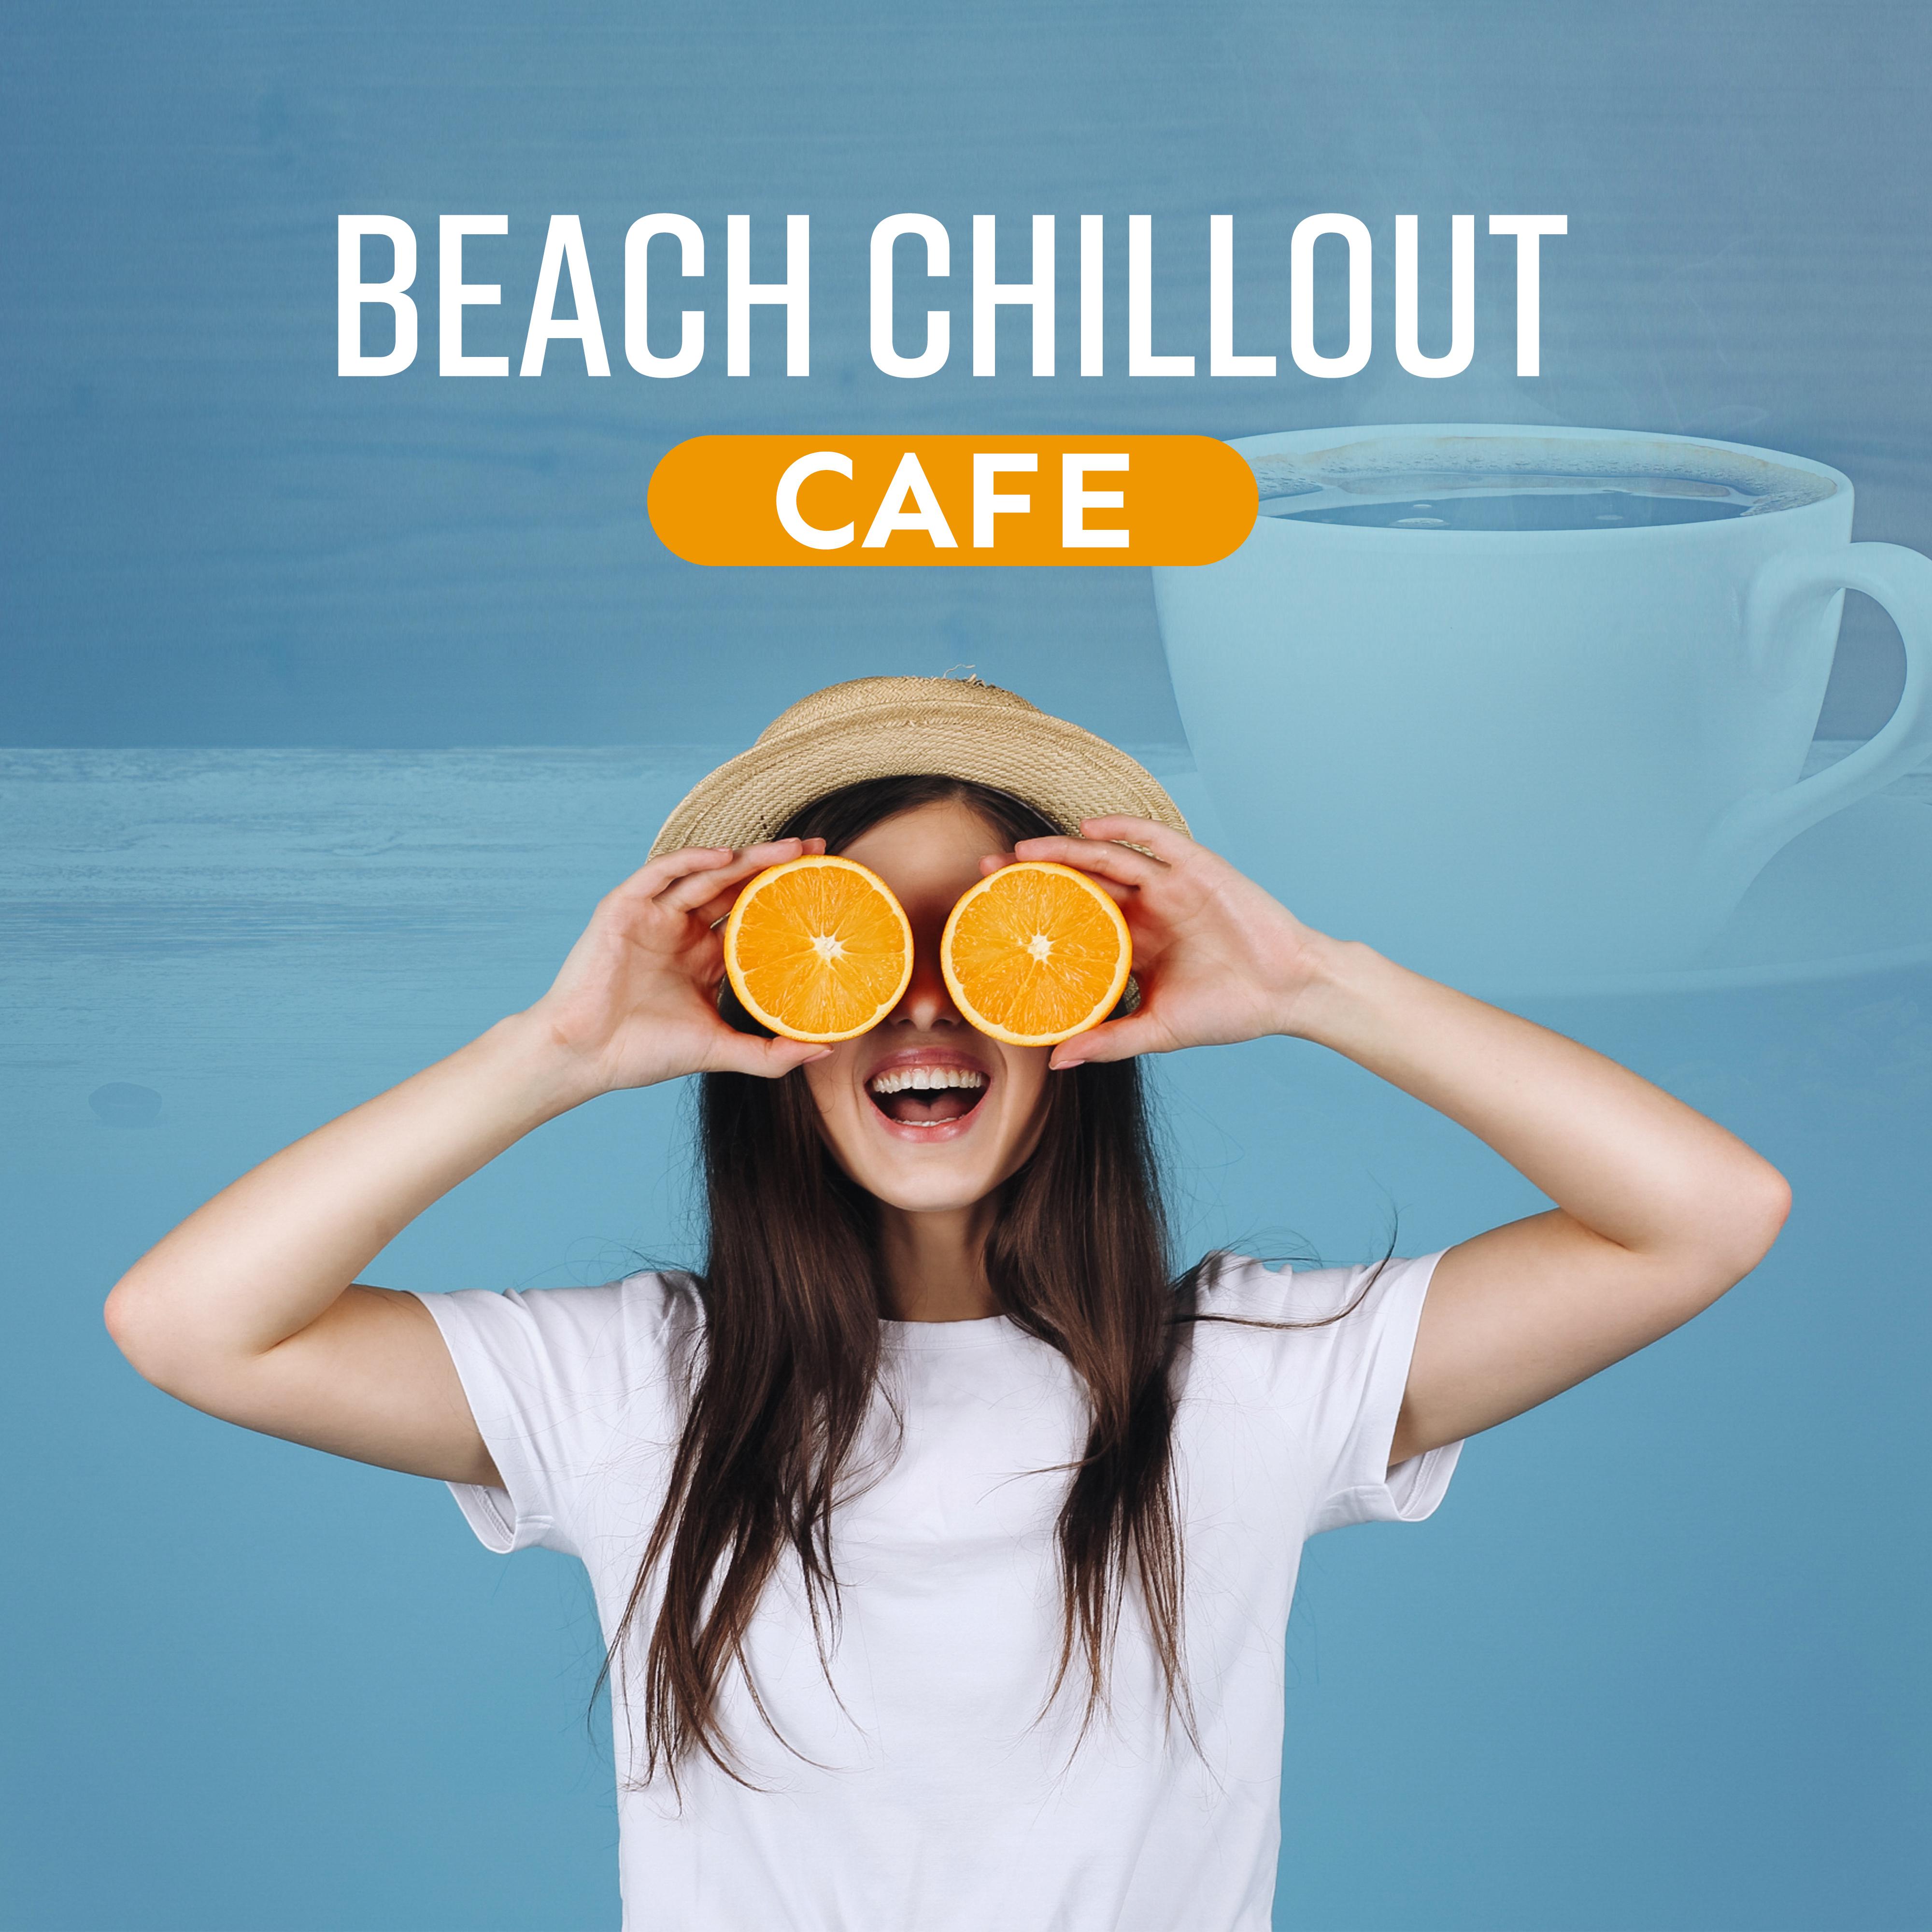 Beach Chillout Cafe